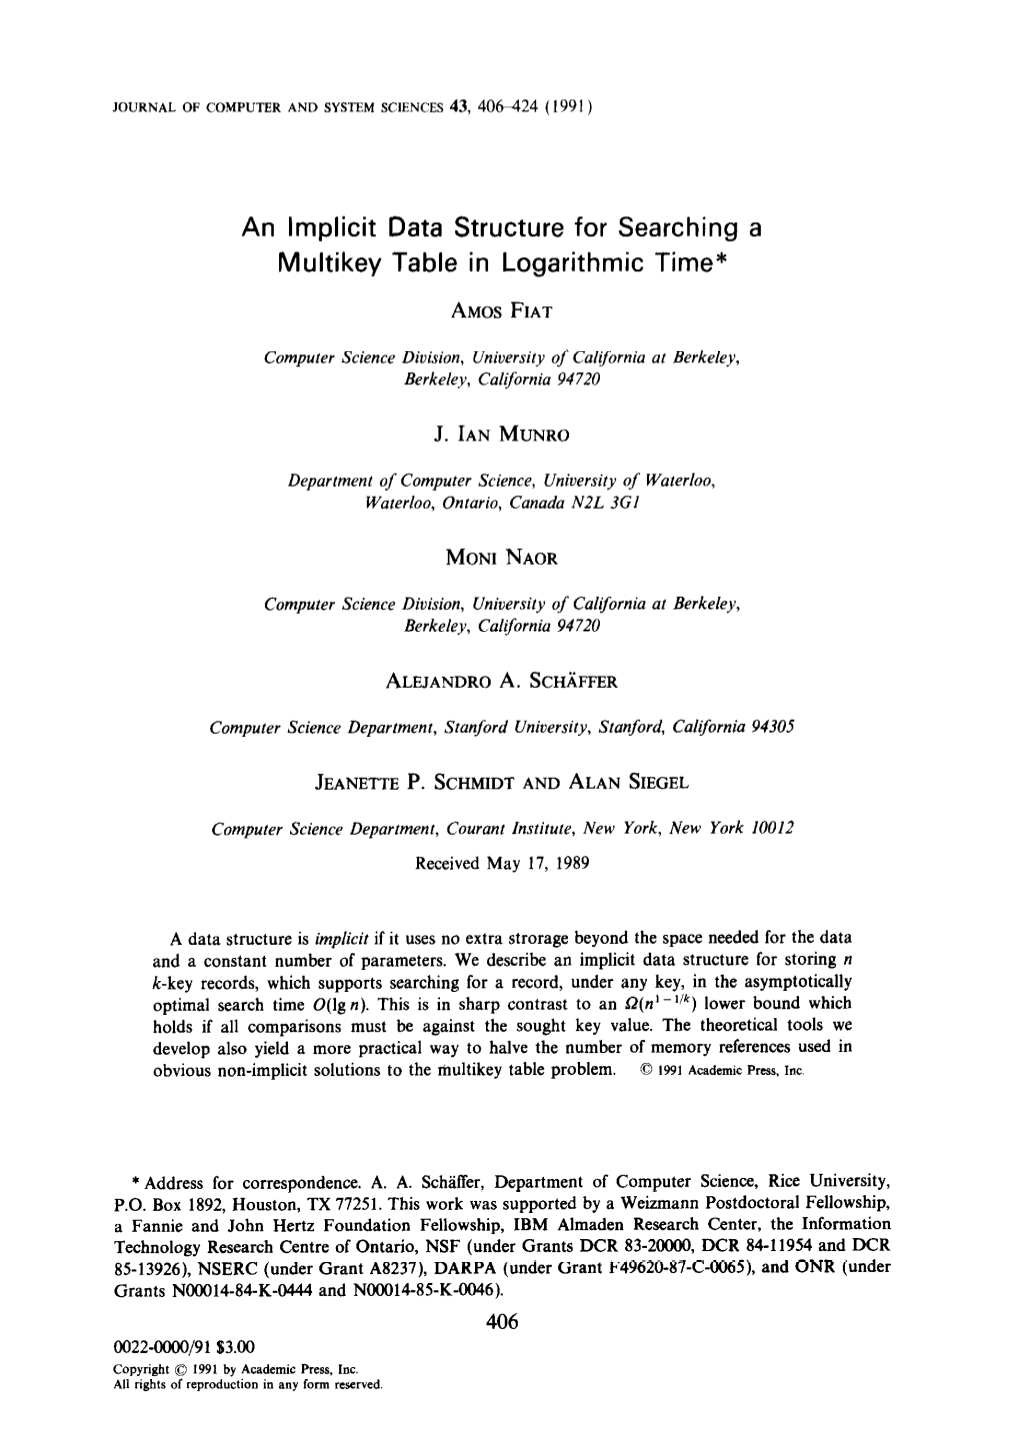 An Implicit Data Structure for Searching a Multikey Table in Logarithmic Time* AMOSFIAT